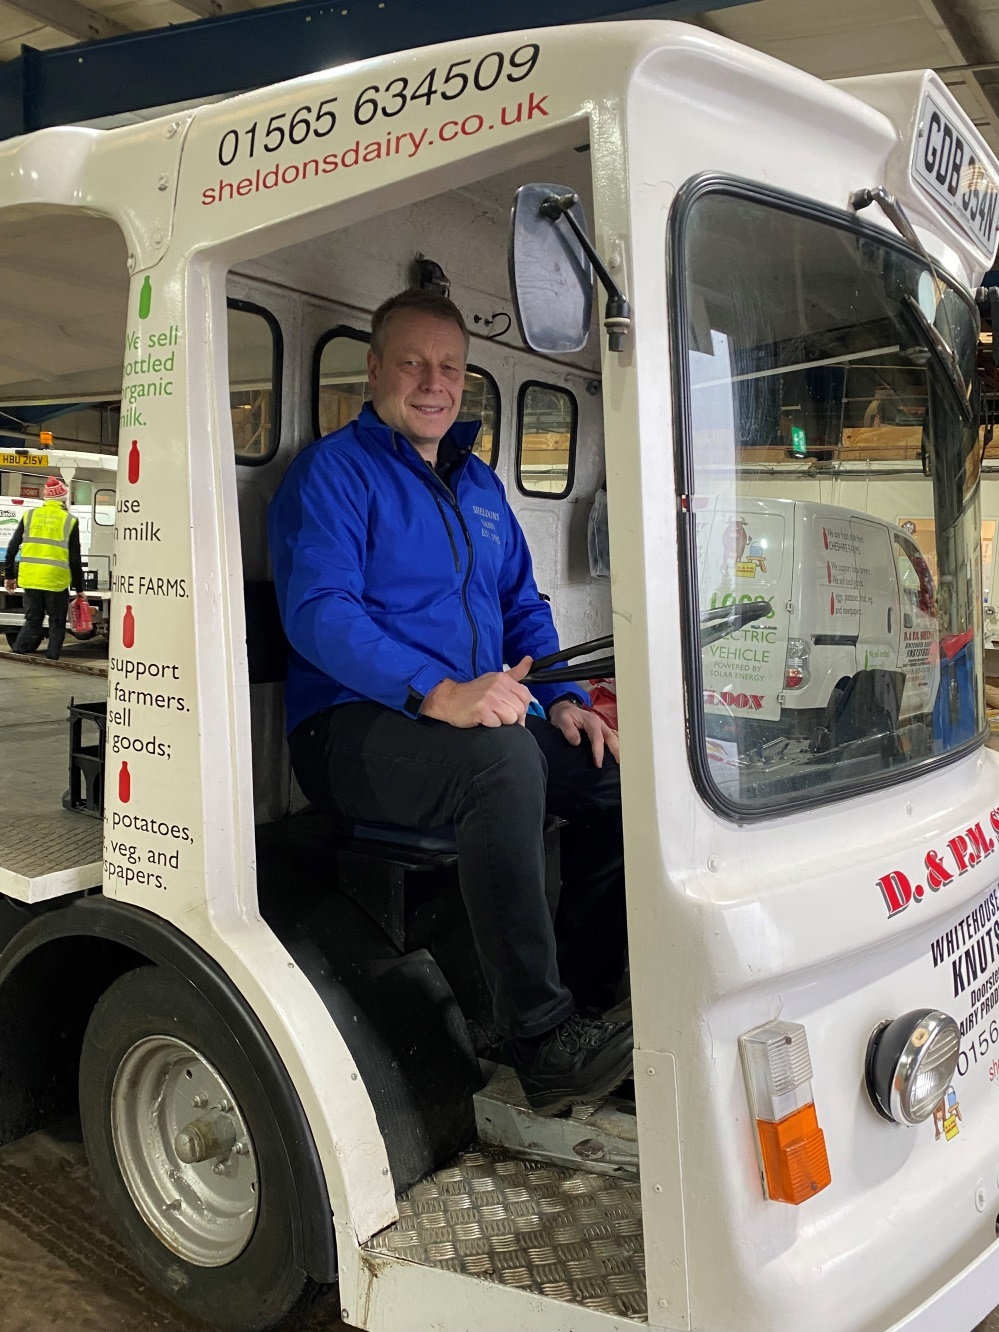 Chris Sheldon on one of the electric milk floats charged by solar panels at the dairy premises